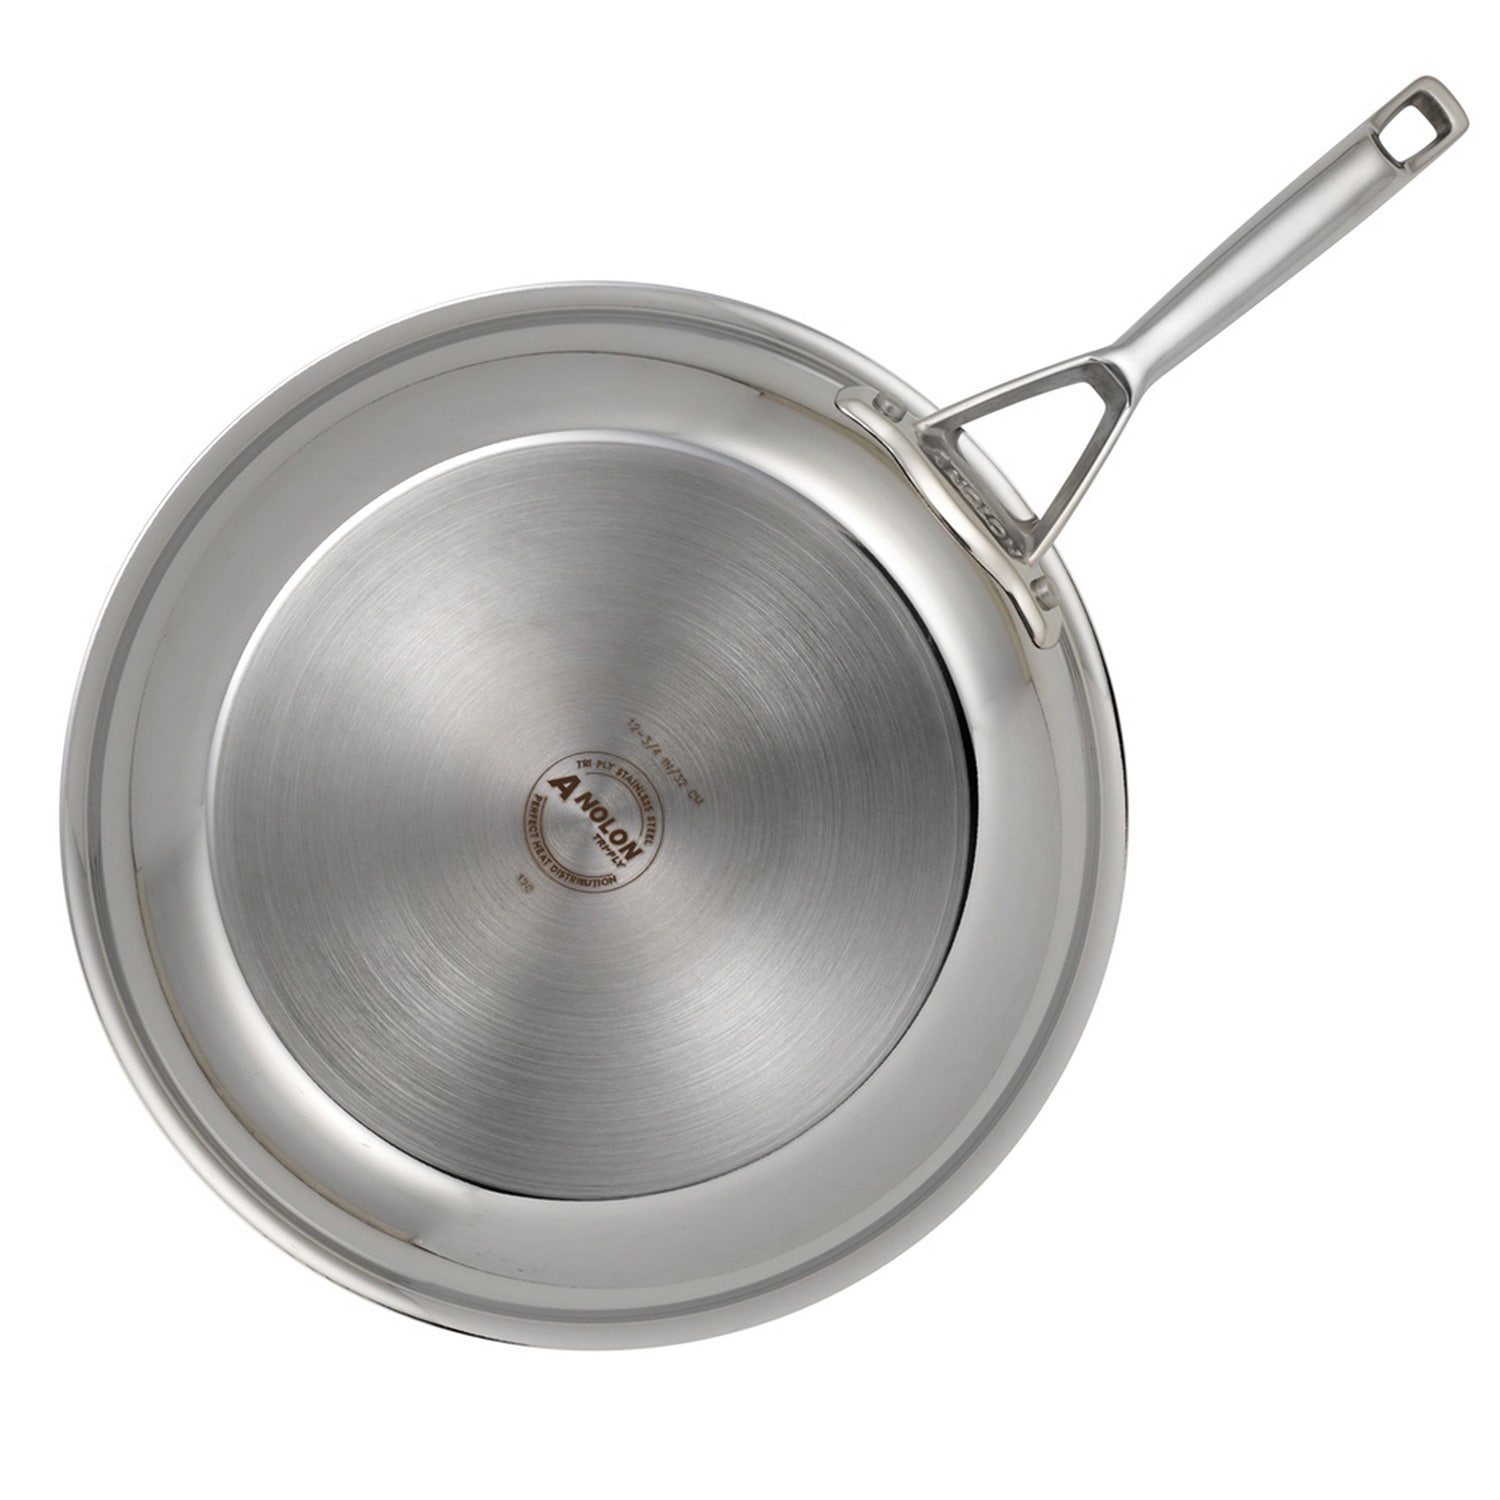 https://ak1.ostkcdn.com/images/products/9206704/Anolon-Tri-ply-Clad-Stainless-Steel-12-3-4-inch-Covered-Skillet-5080ac0a-04fe-4d58-93ee-5370f34af719.jpg